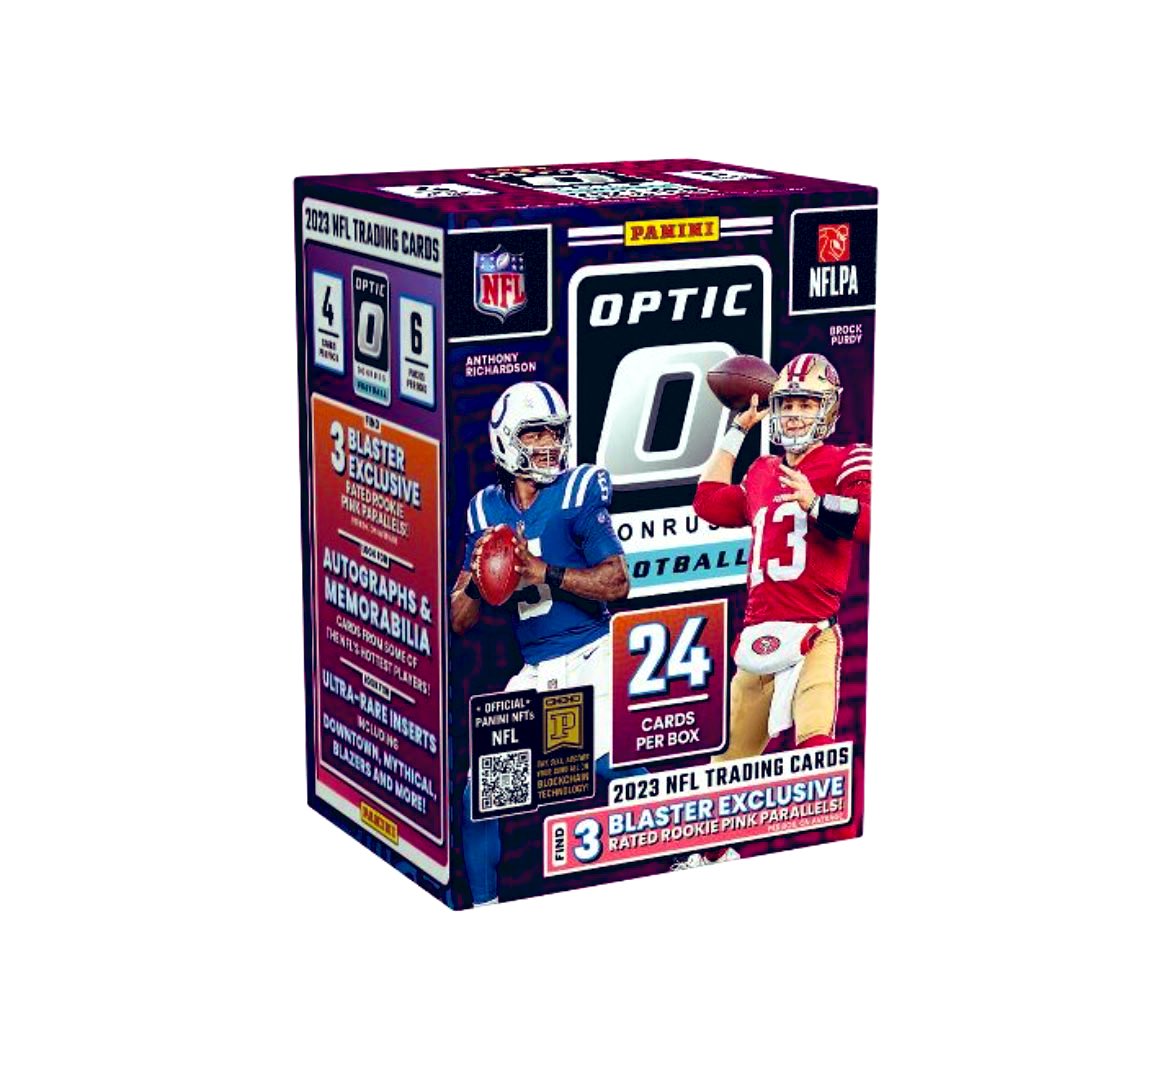 🎁 GIVEAWAY 🎁 

Enter for a chance to win a FREE 2023 Donruss Optic 🏈 Blaster Box! 

- Follow @ricanking6 & @DropsMonitor 
- Like & Repost
- Comment your favorite NFL team

Winner drawn Sunday 5/19 at 9pm EST